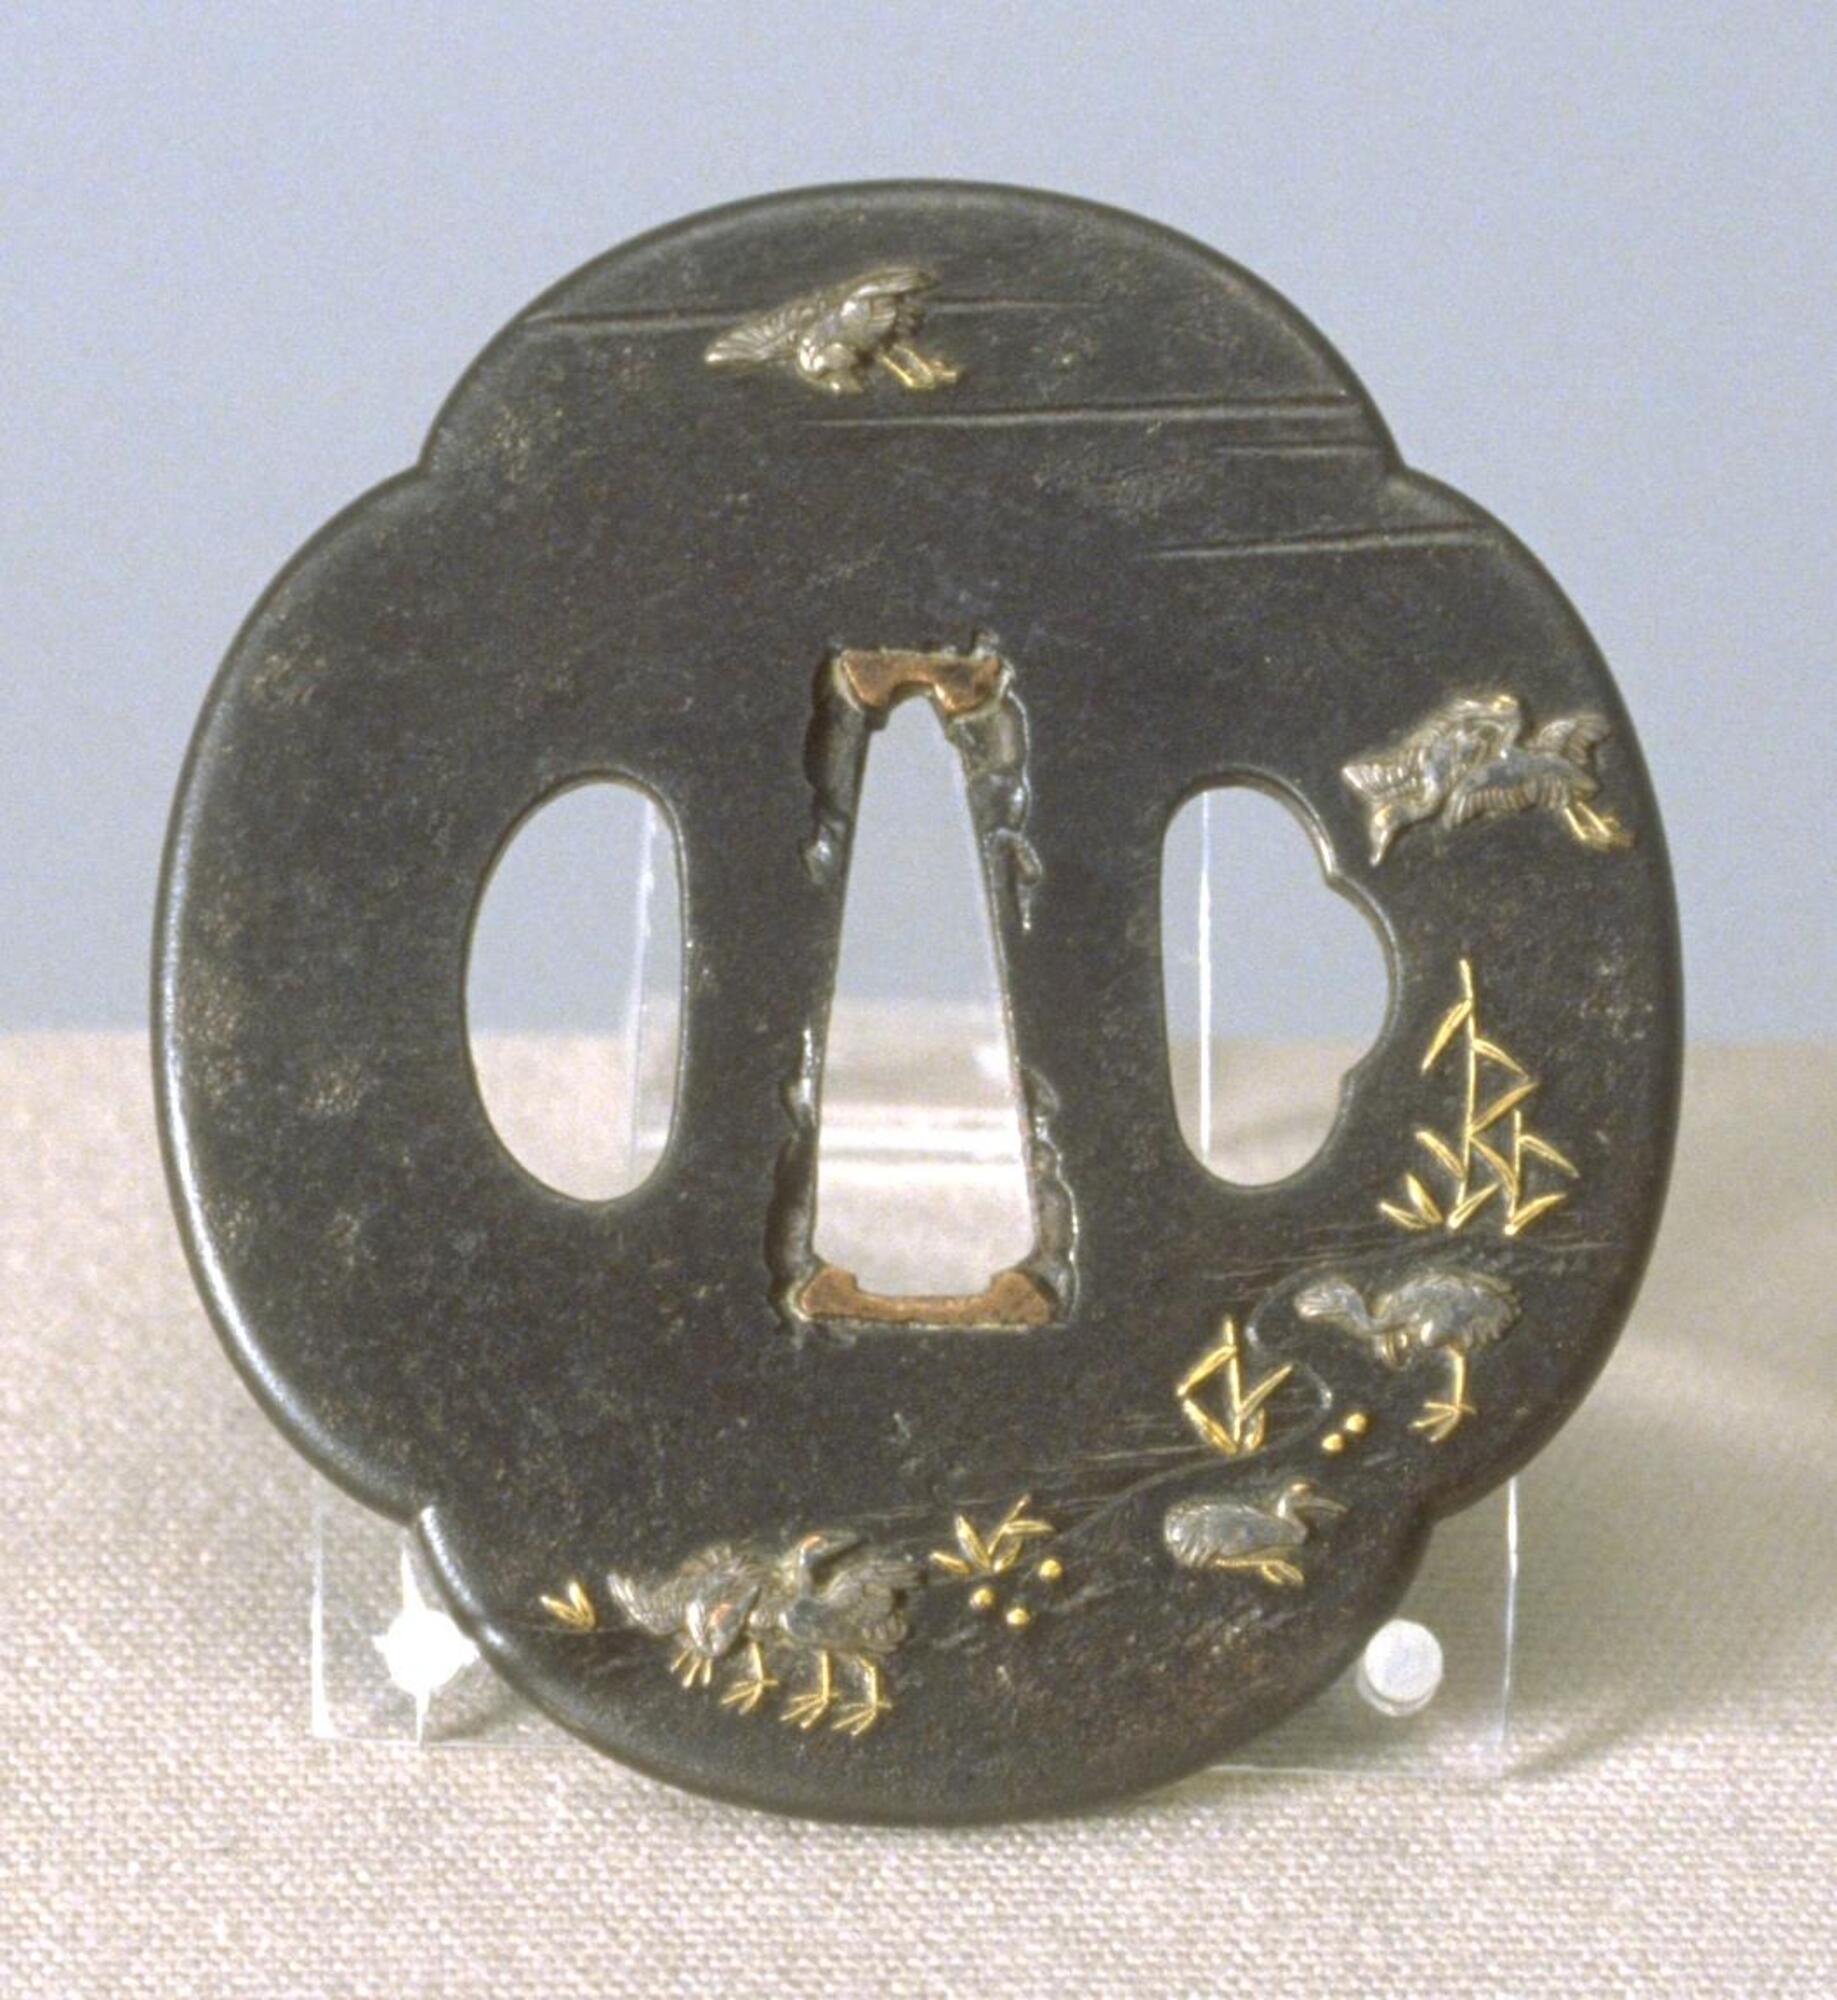 This tsuba is a flat iron plate with quatrefoil design. It has three holes: one for blade (middle) flanked by oval-shape hole (for kougai) and oval with bump shape (for kozuka).  Egrets and reeds decorate the surface, distributed in a curve that climbs counter-clockwise from the bottom left register, culmiating in the top left with a lone egret in flight.  Egrets on the bottom of the piece perch on the ground or nest in the golden reeds.<br />